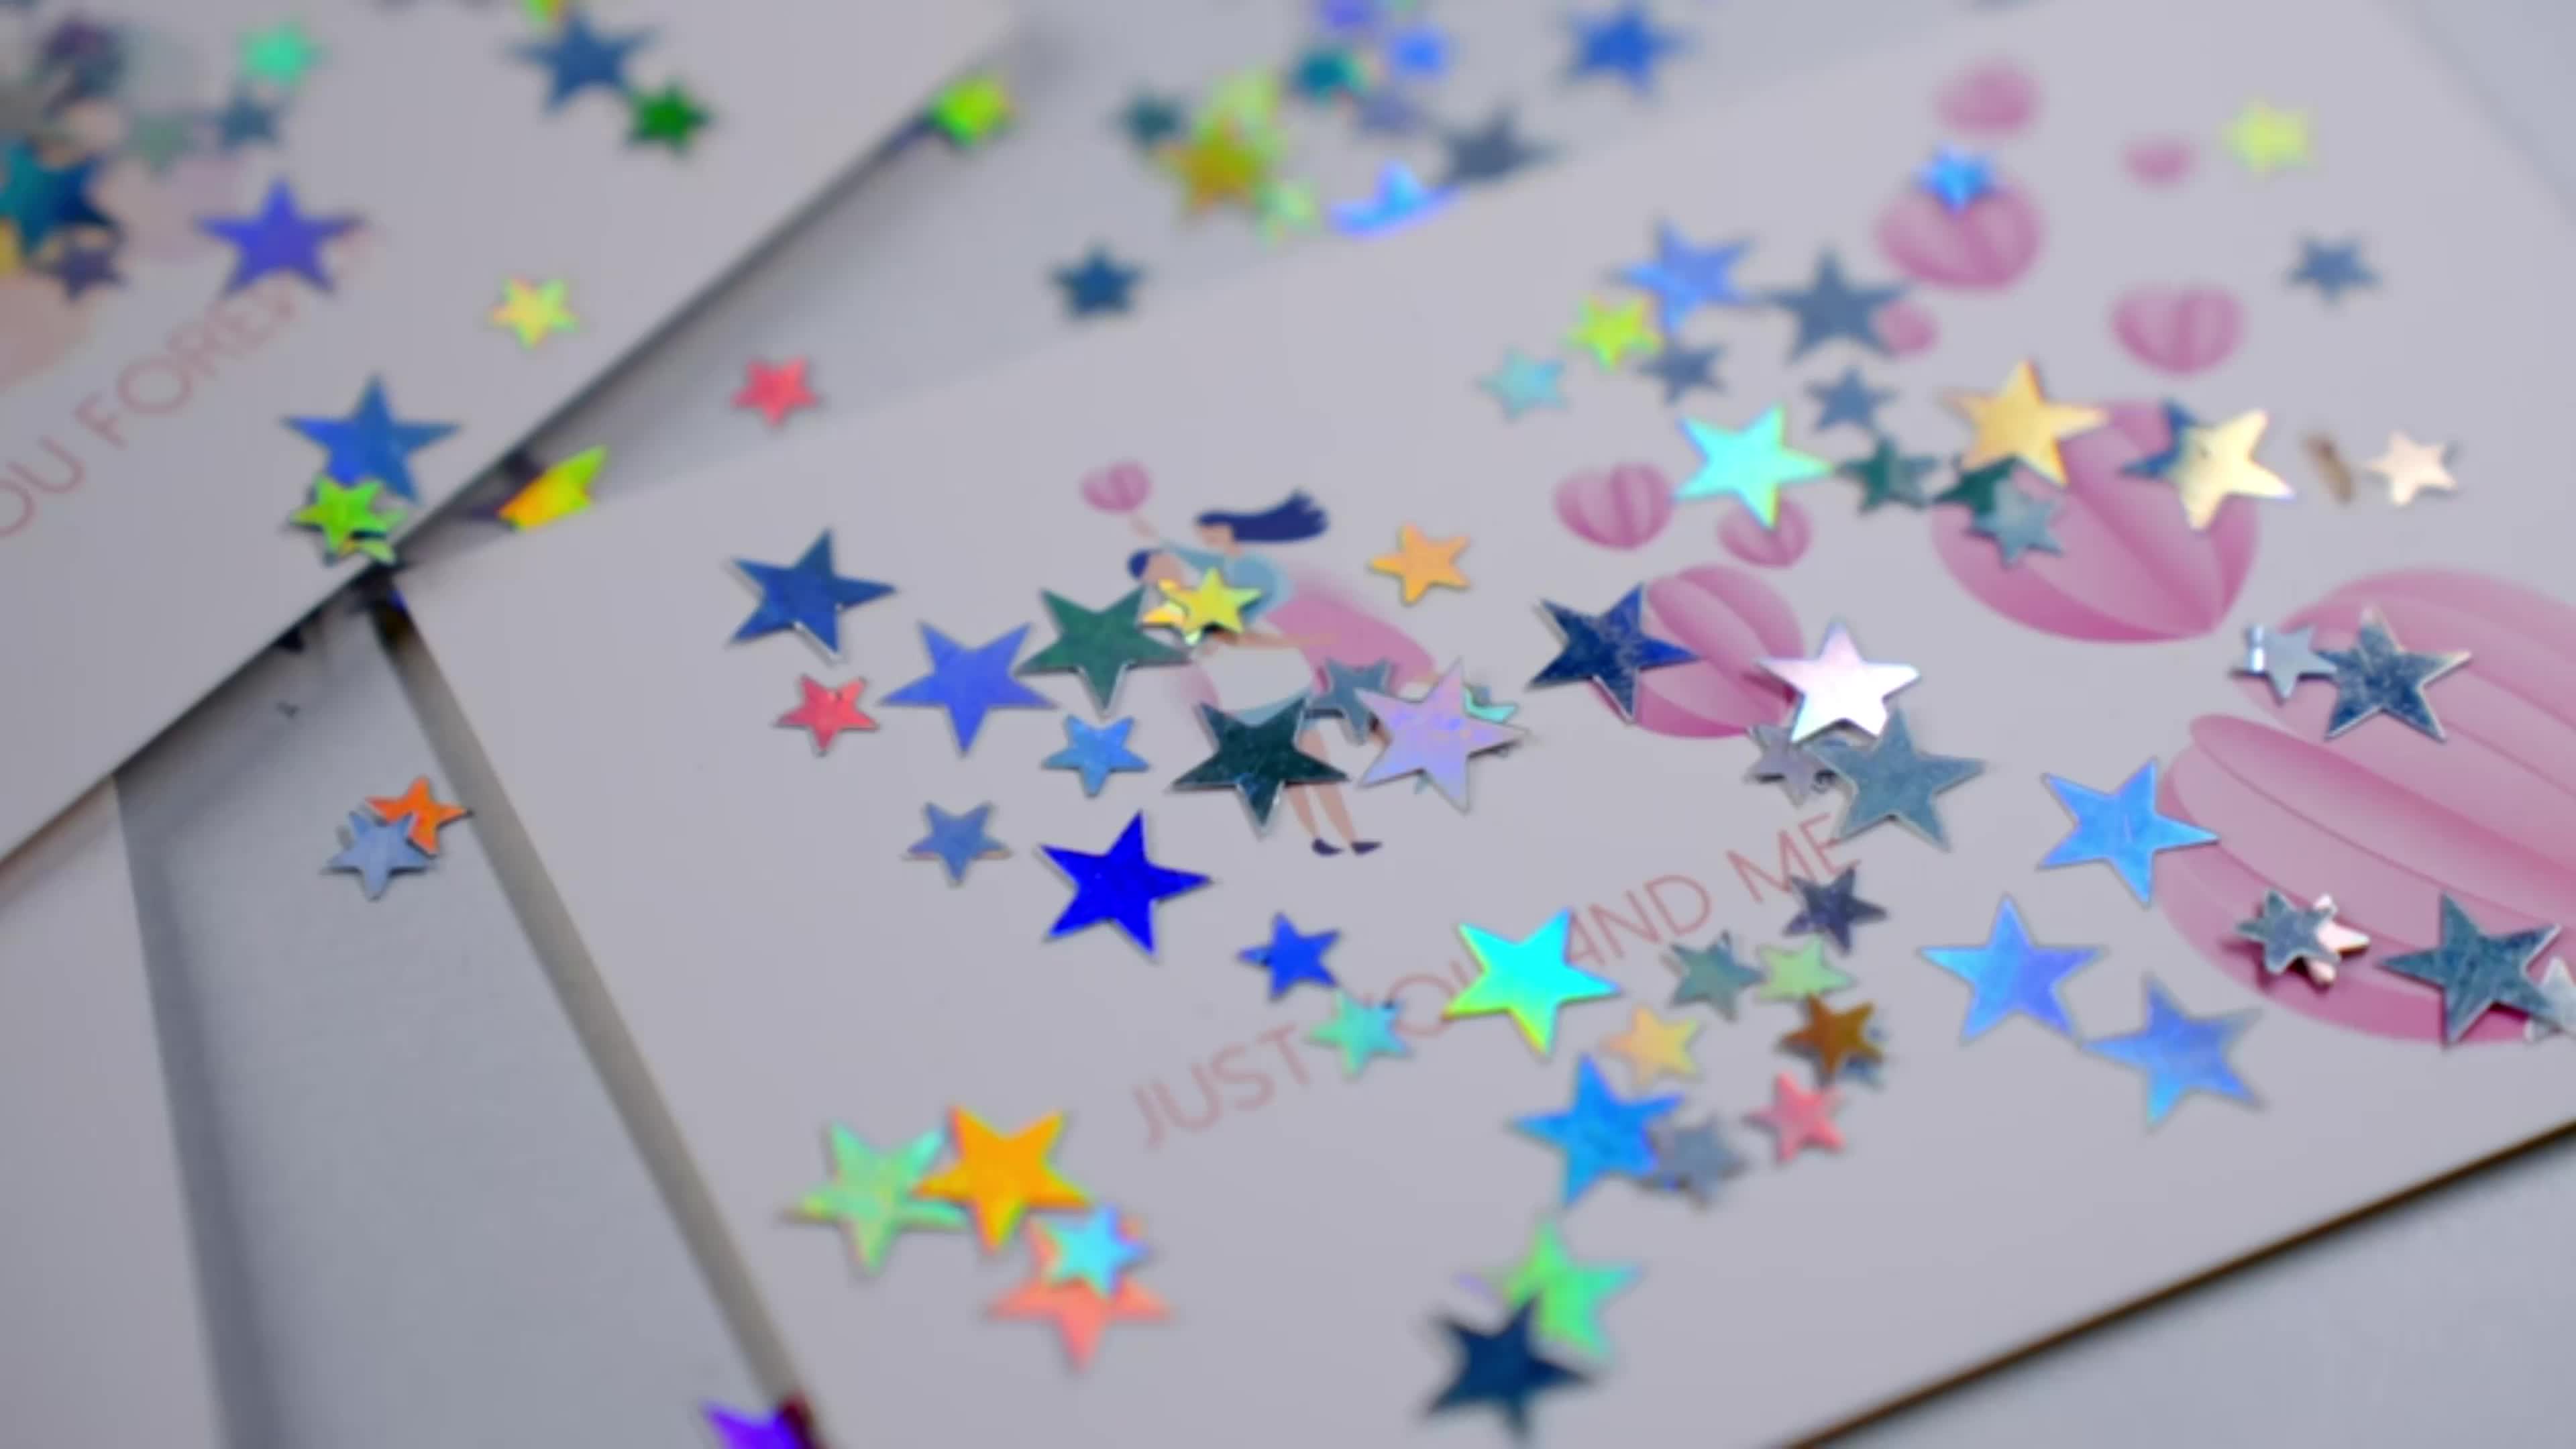 HESTYA 60g star Confetti Glitter Star Table Confetti Metallic Foil Stars  for Party Wedding Festival Decorations (Holographic Silver, 10mm and 6mm)